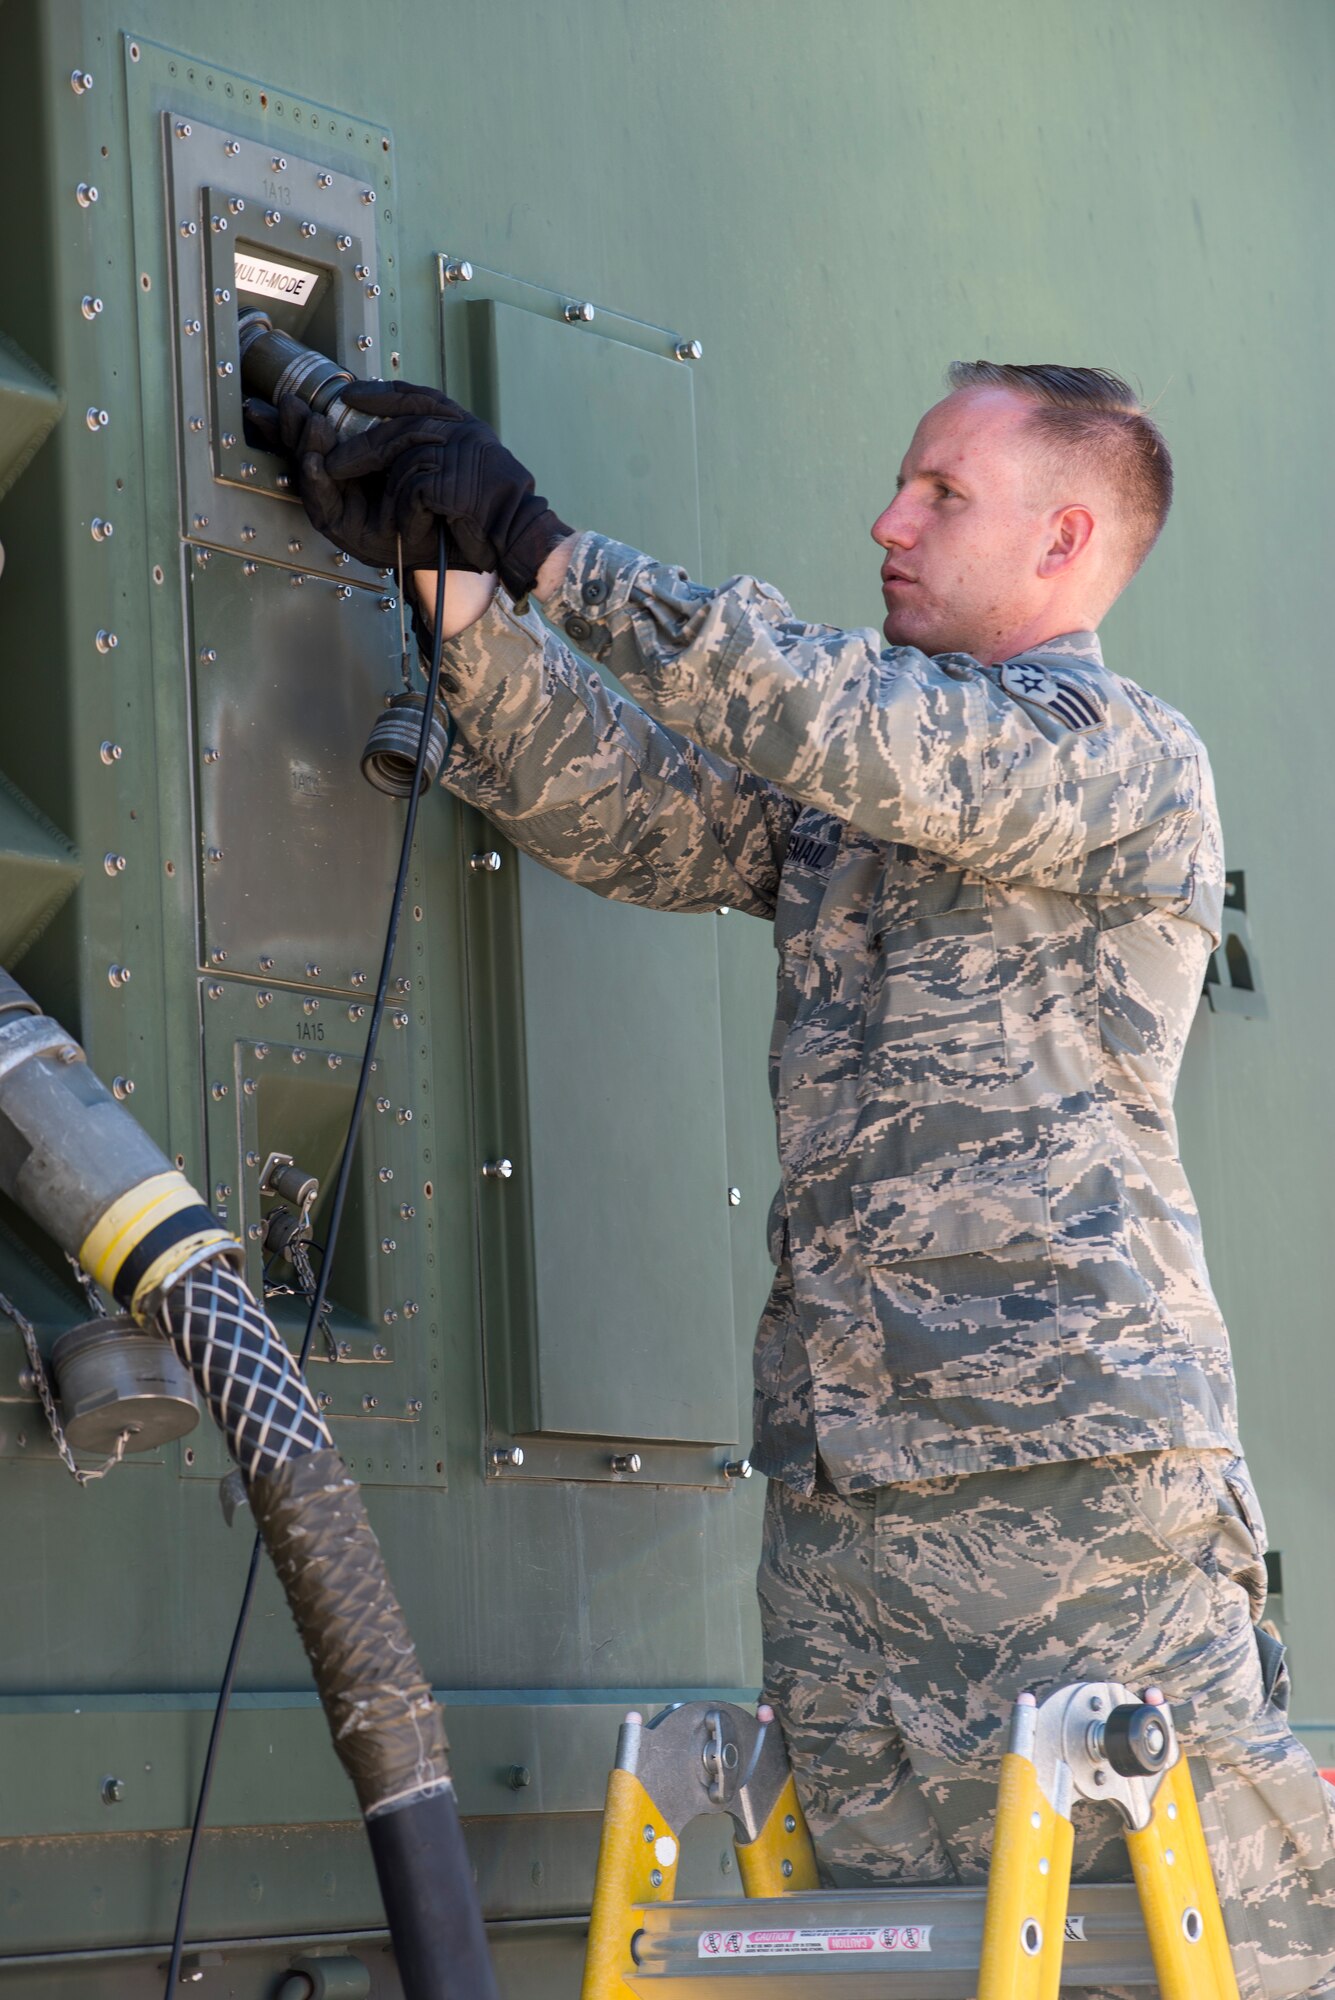 U.S. Air Force Senior Airman Jonathan R. Smail, a transmission technician from the 233rd Space Communications Squadron, Colorado Air National Guard, checks the cables hooked up to a mobile satellite trailer at Greeley Air National Guard Station, Greeley, Colo., June 7, 2015. Smail, who troubleshoots and maintains satellite communications electronic equipment for the 233rd's one-of-a-kind mobile nuclear and missile launch tracking mission, won the 2014 Air National Guardsman of the year. (Air National Guard photo by Tech. Sgt. Wolfram M. Stumpf)